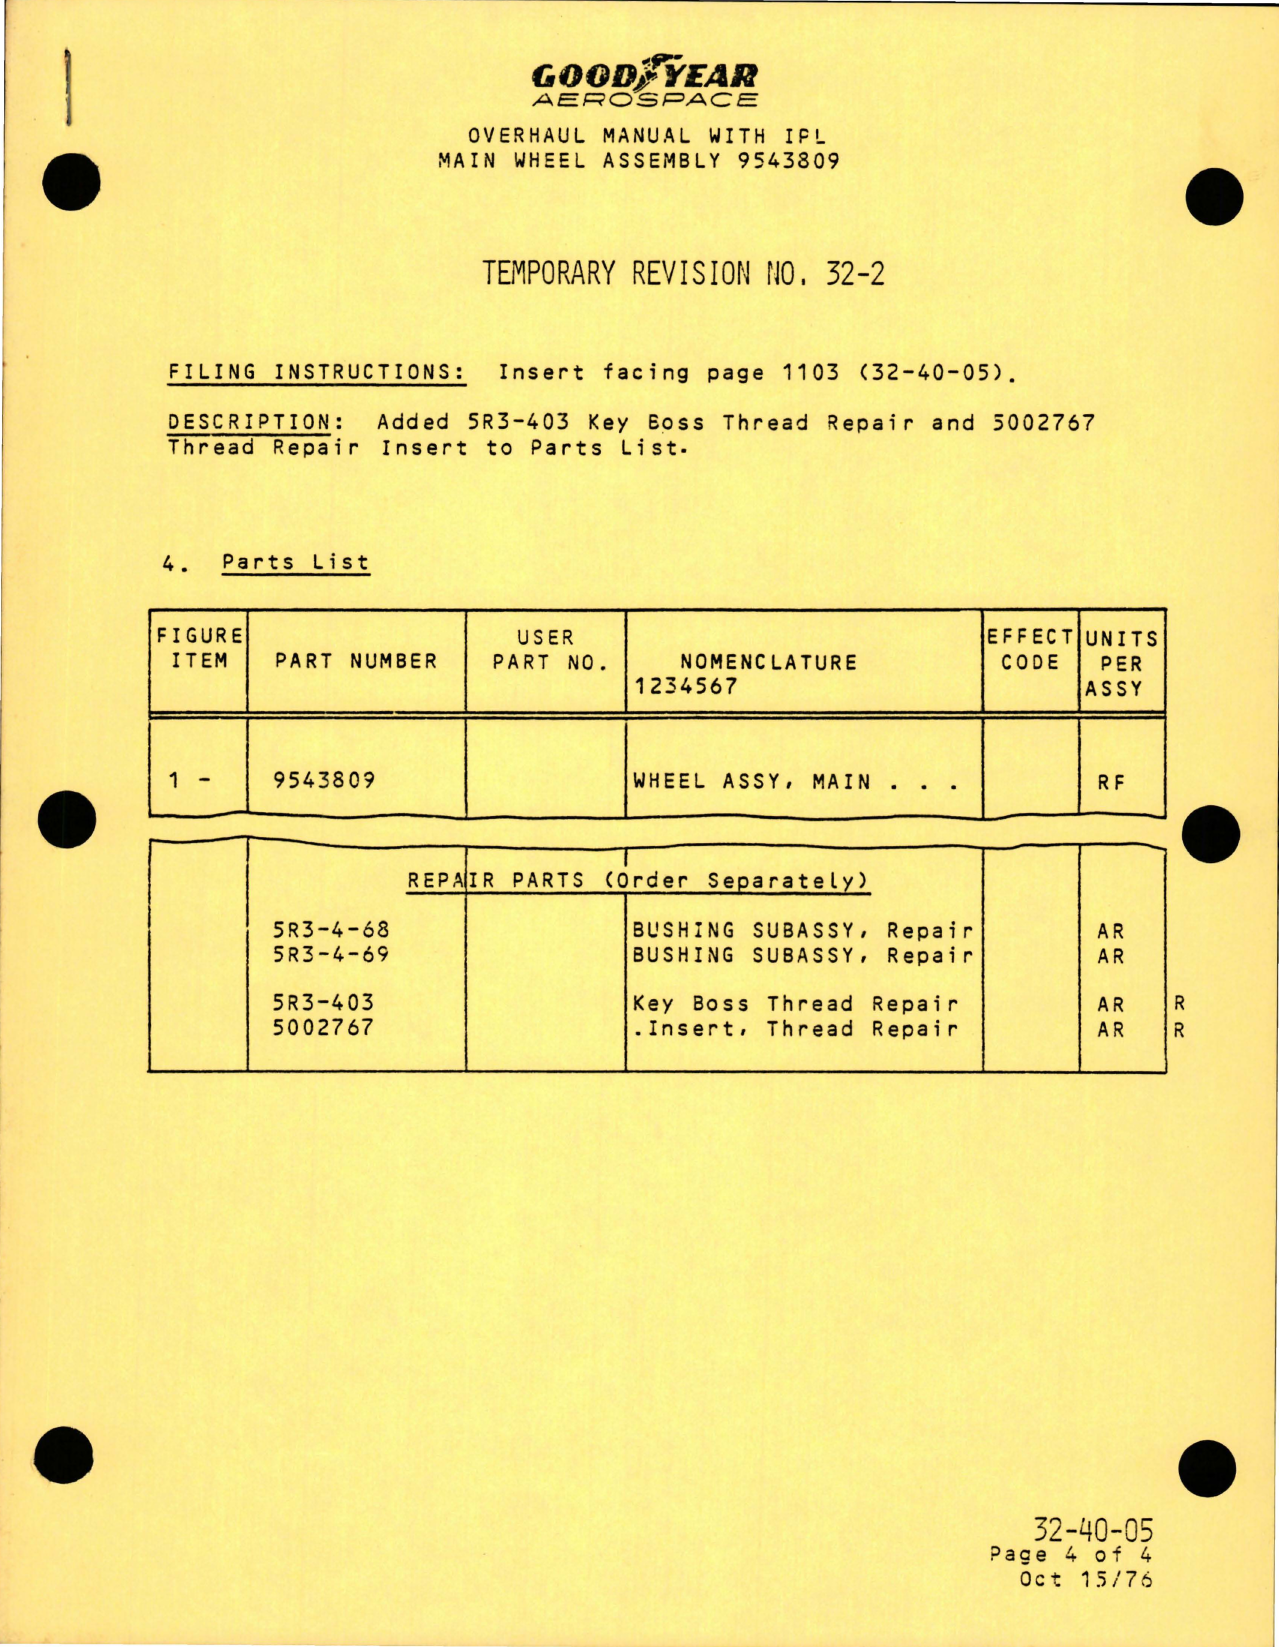 Sample page 9 from AirCorps Library document: Overhaul with Illustrated Parts List for Nose Wheel, Main Wheel, and Brake Assemblies